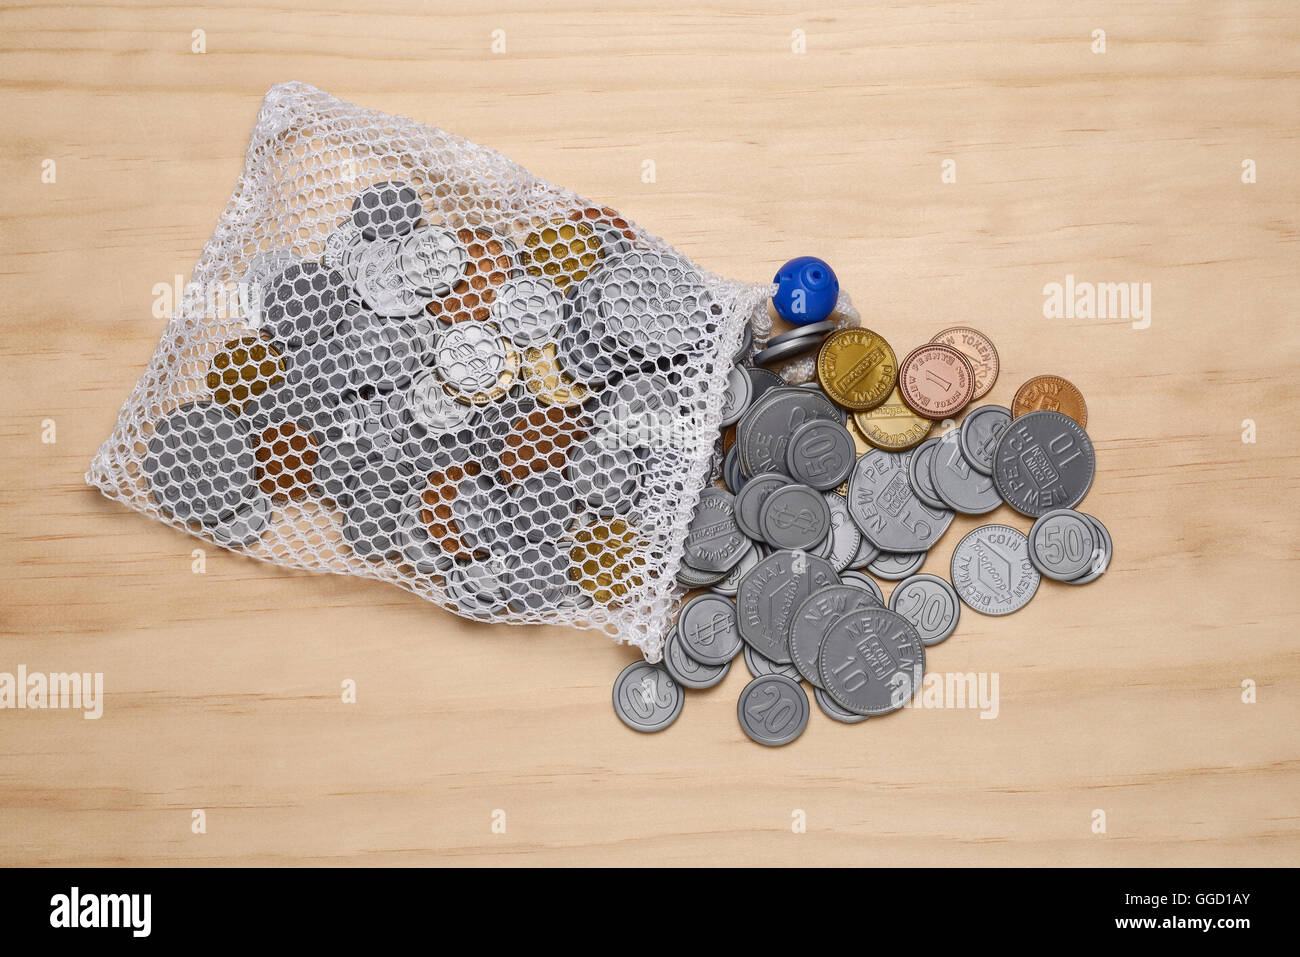 A bag of toy plastic UK sterling coins Stock Photo